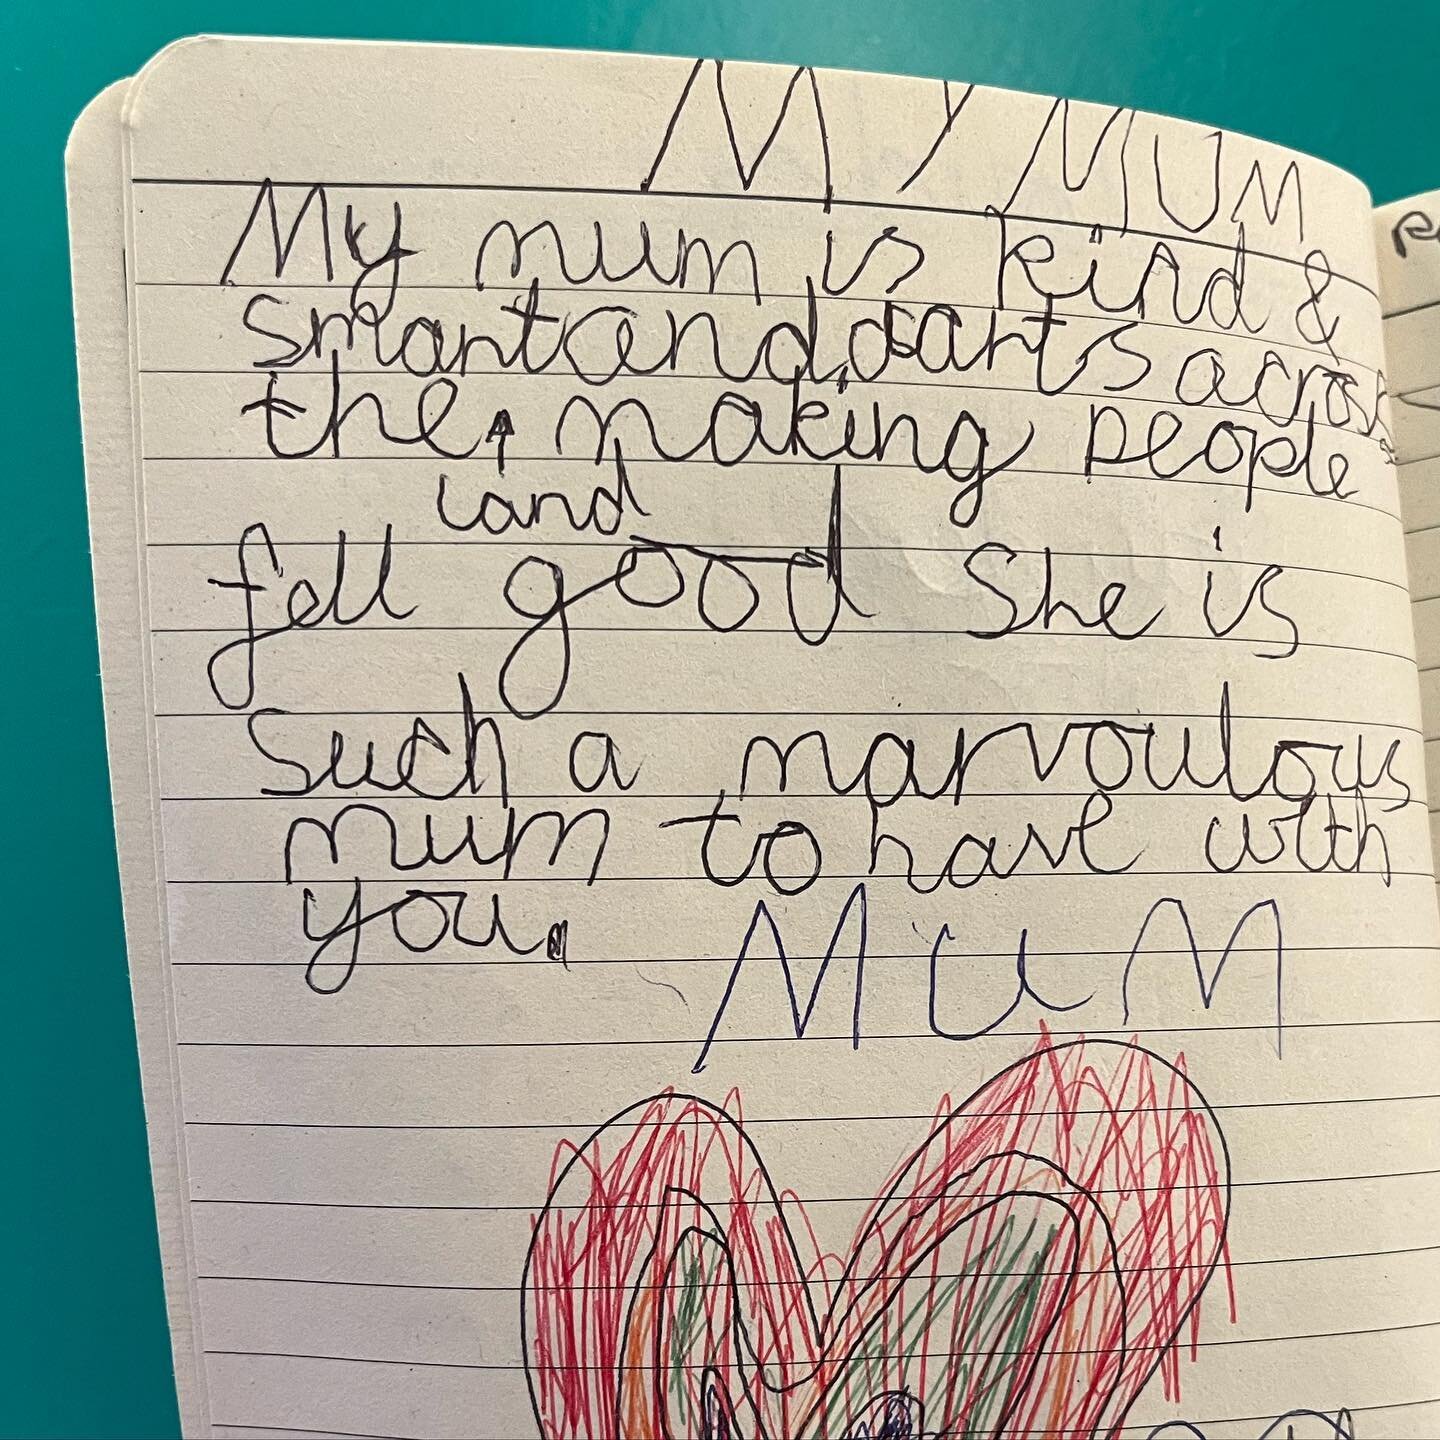 I think I might put my daughter in charge of my marketing😍

&lsquo;My mum is kind and smart and darts across the land making people feel good. She is such a marvellous mum to have with you&rsquo;.

Who wouldn&rsquo;t want me as their postnatal doula